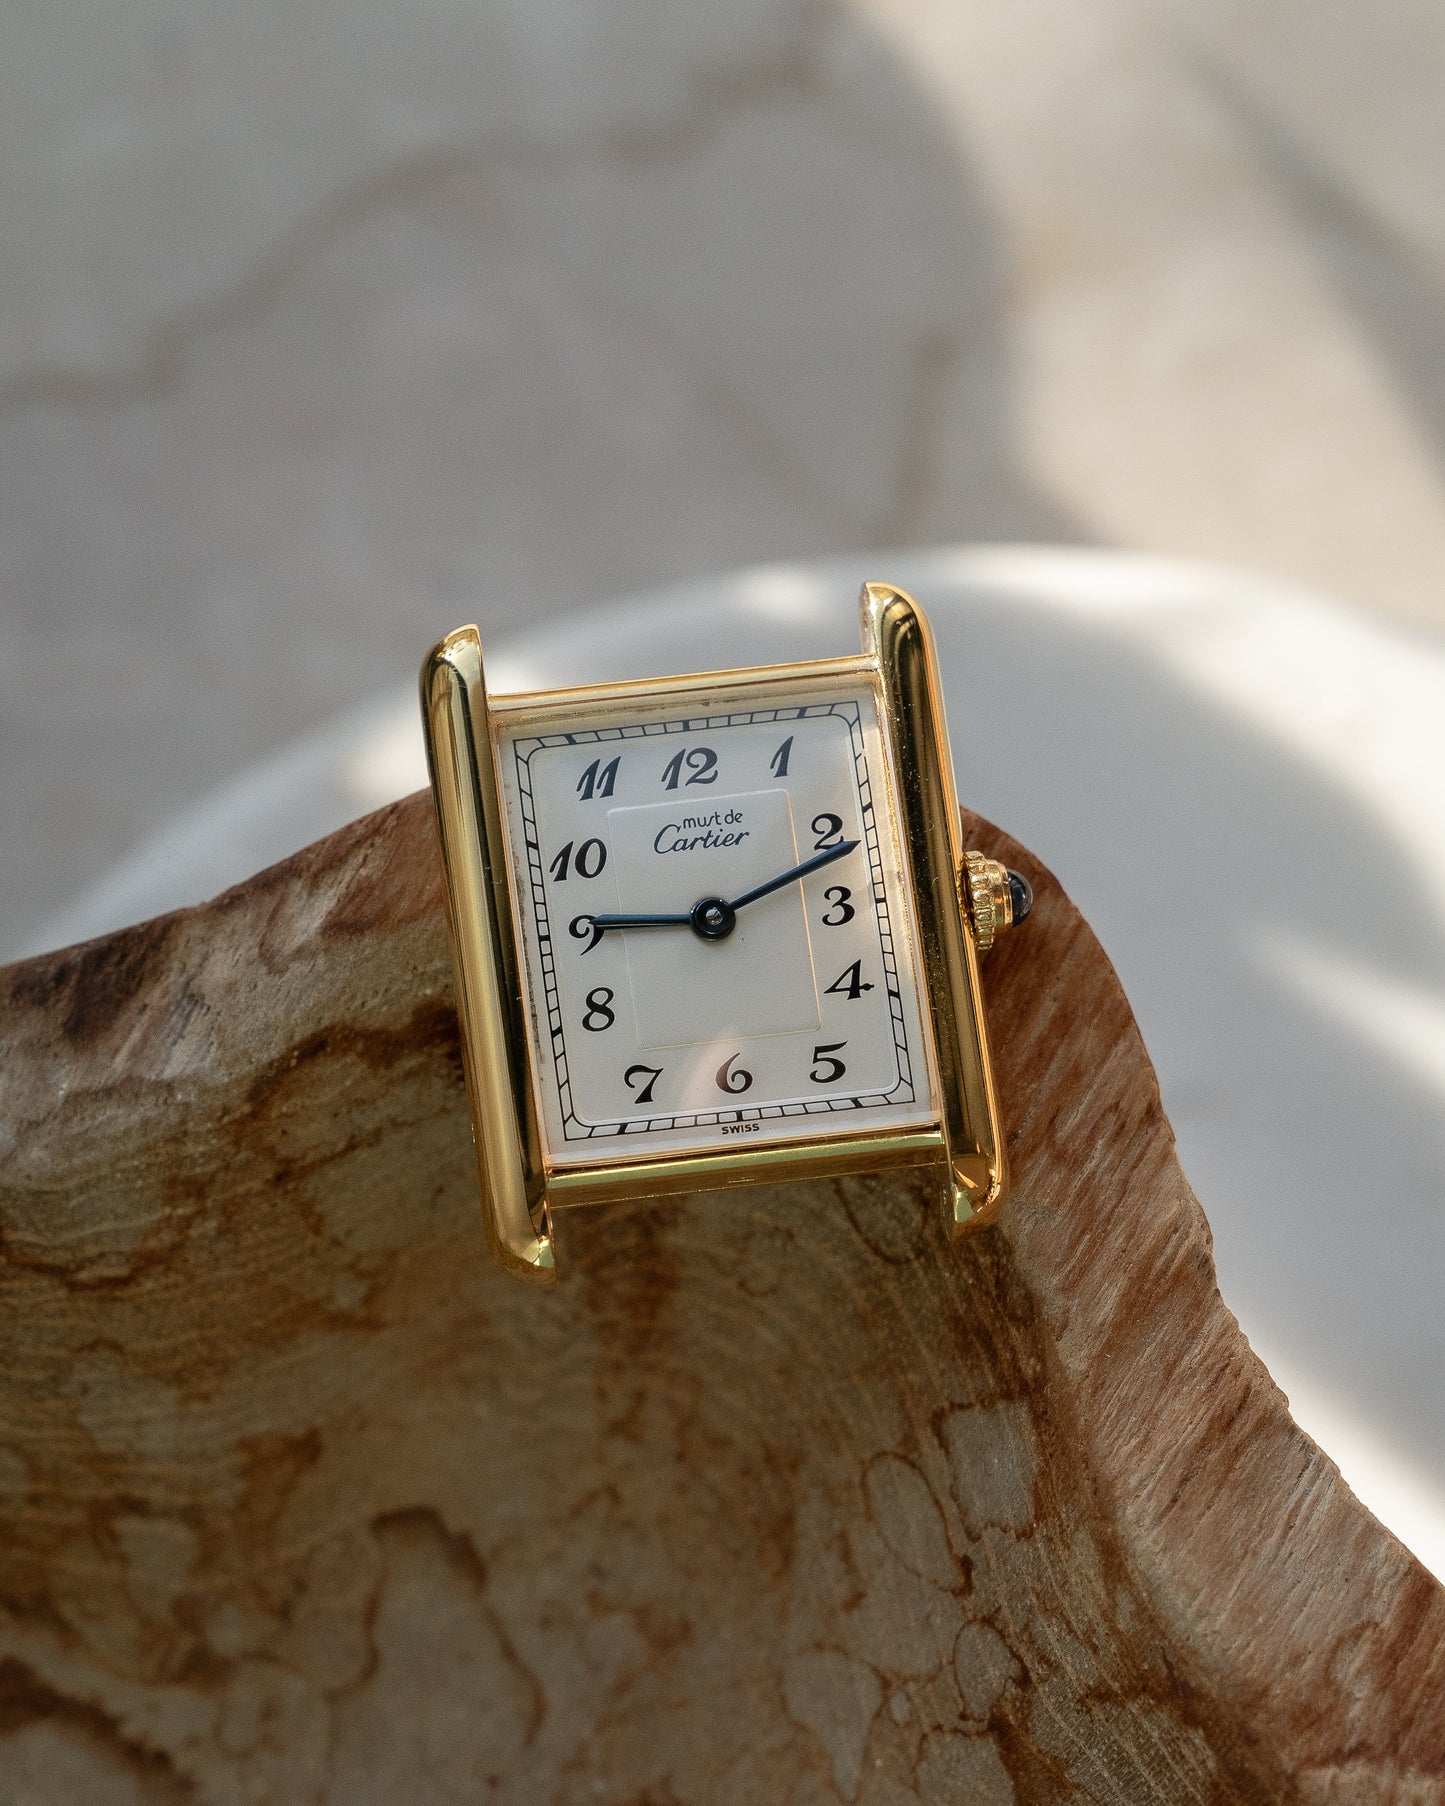 Must de Cartier Tank Breguet Numerals - LM size - box and papers